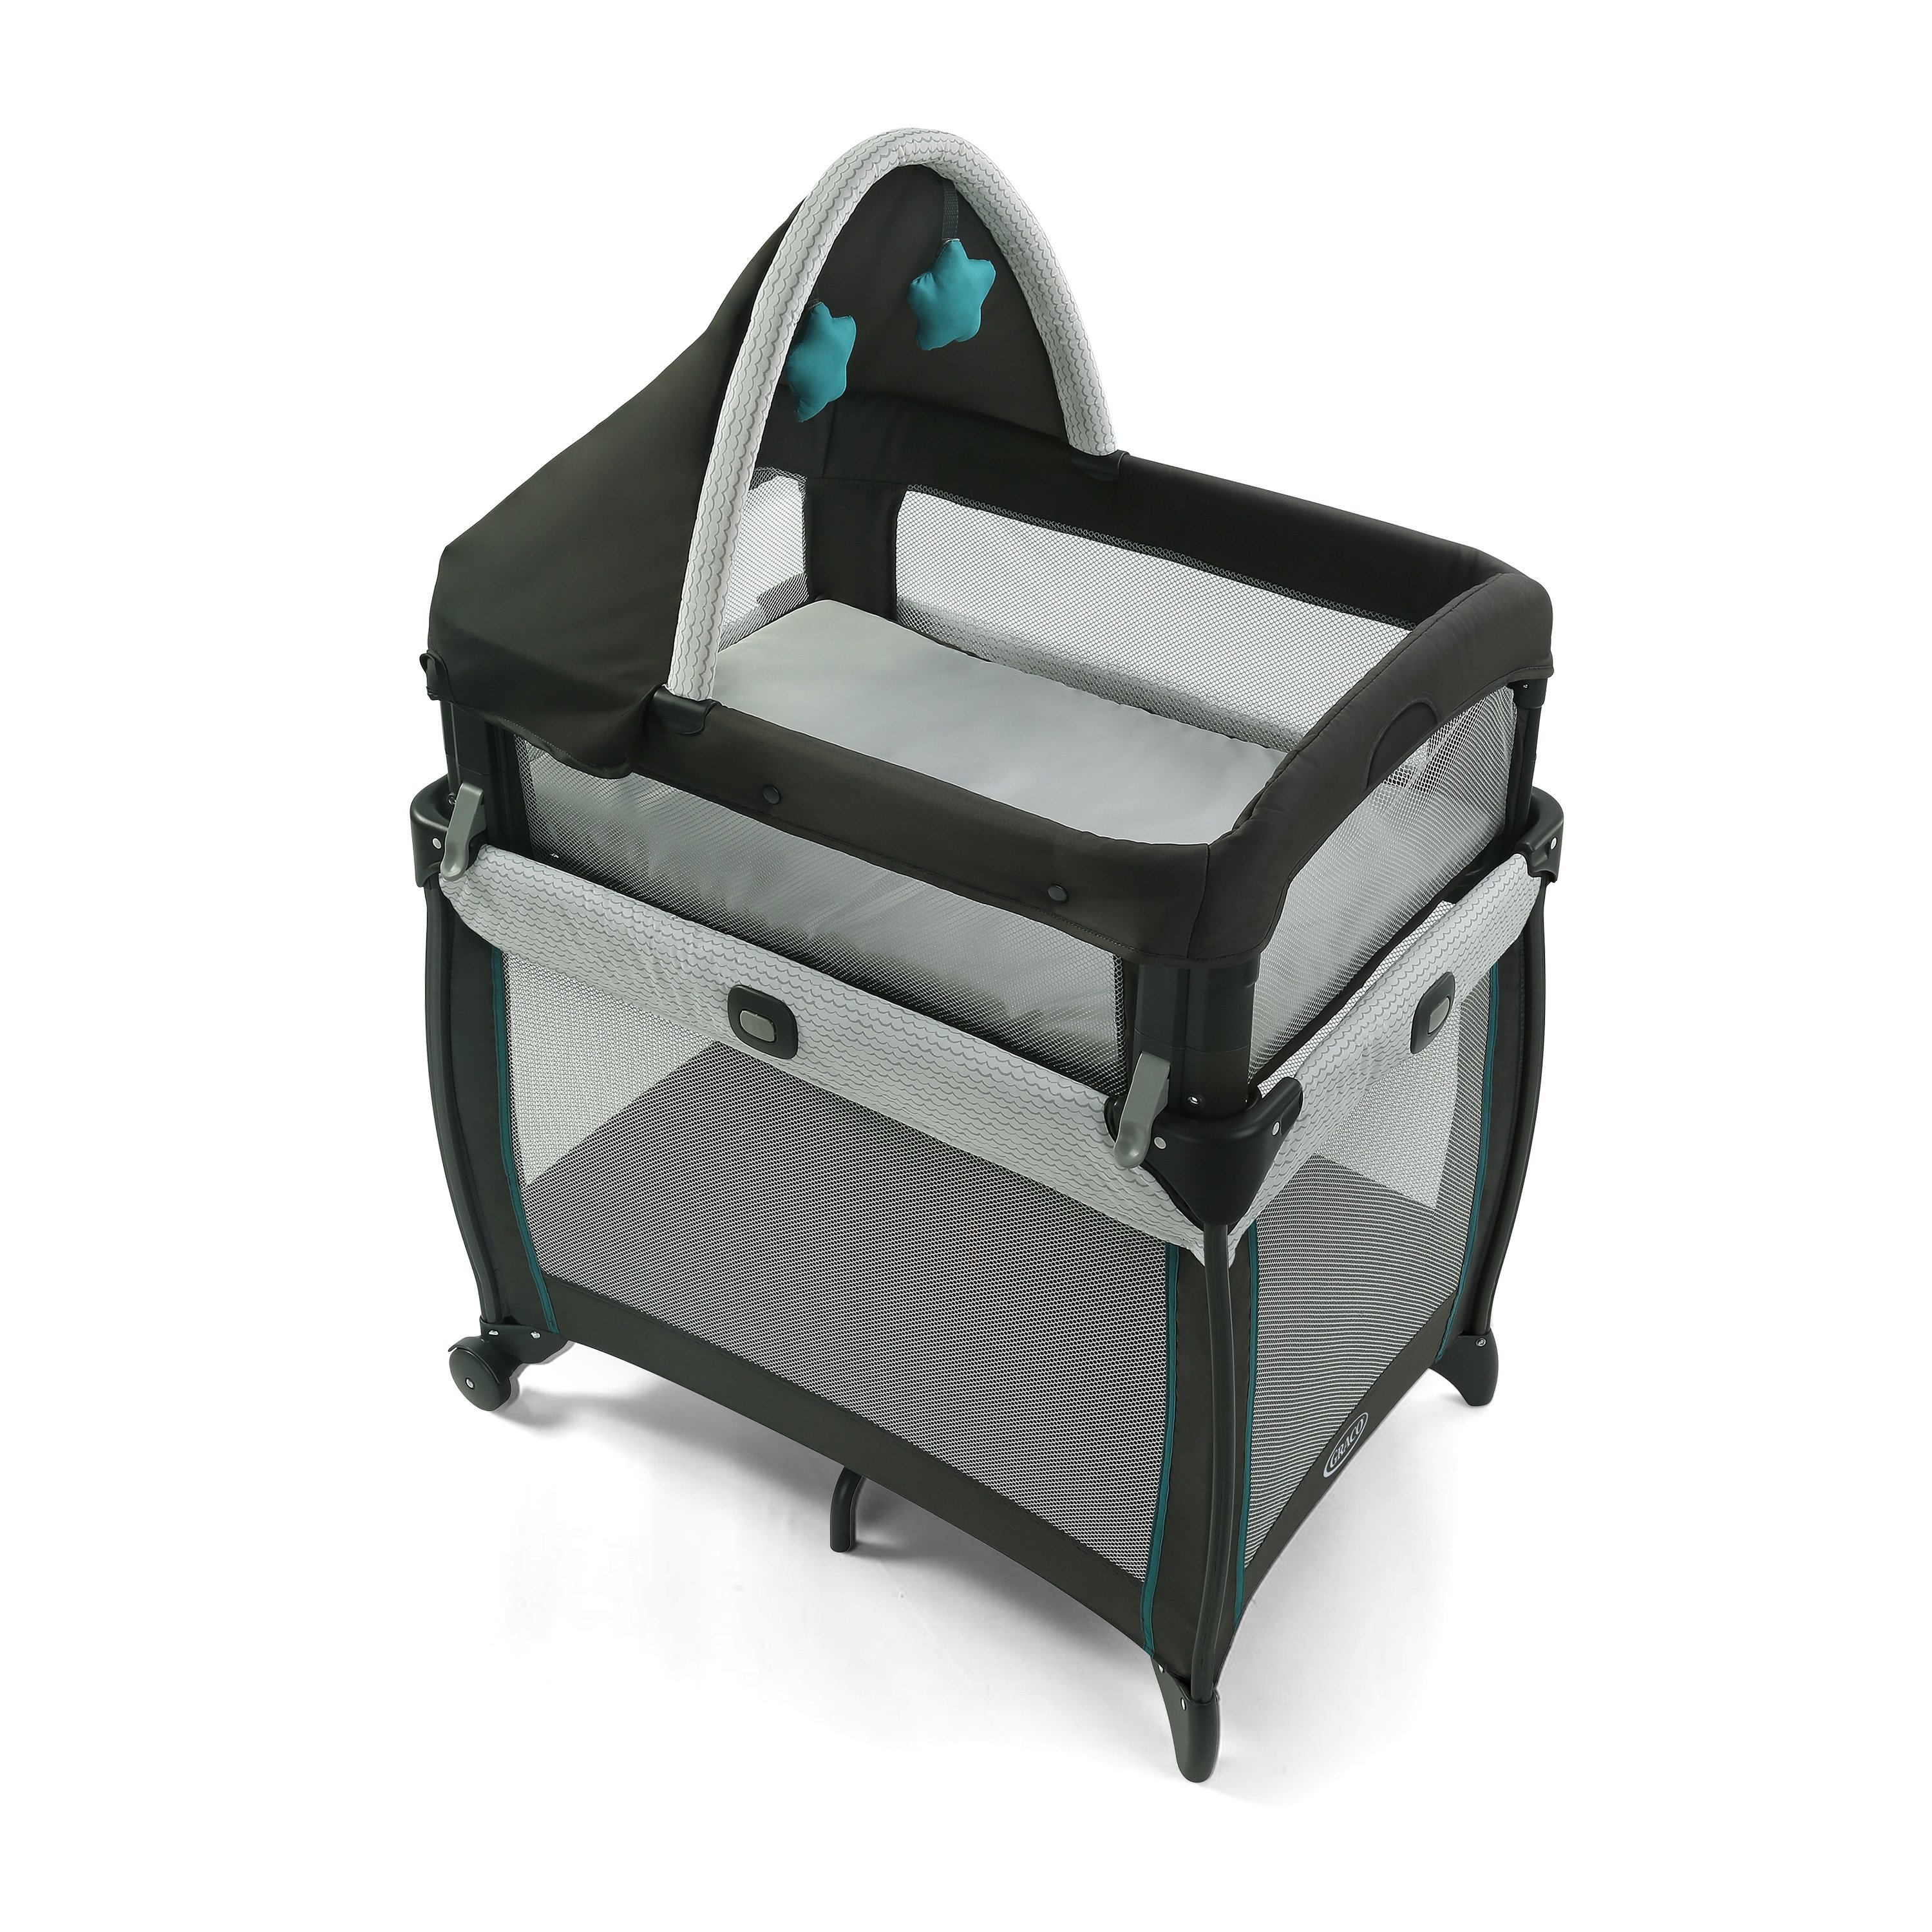 bassinet for up to 1 year